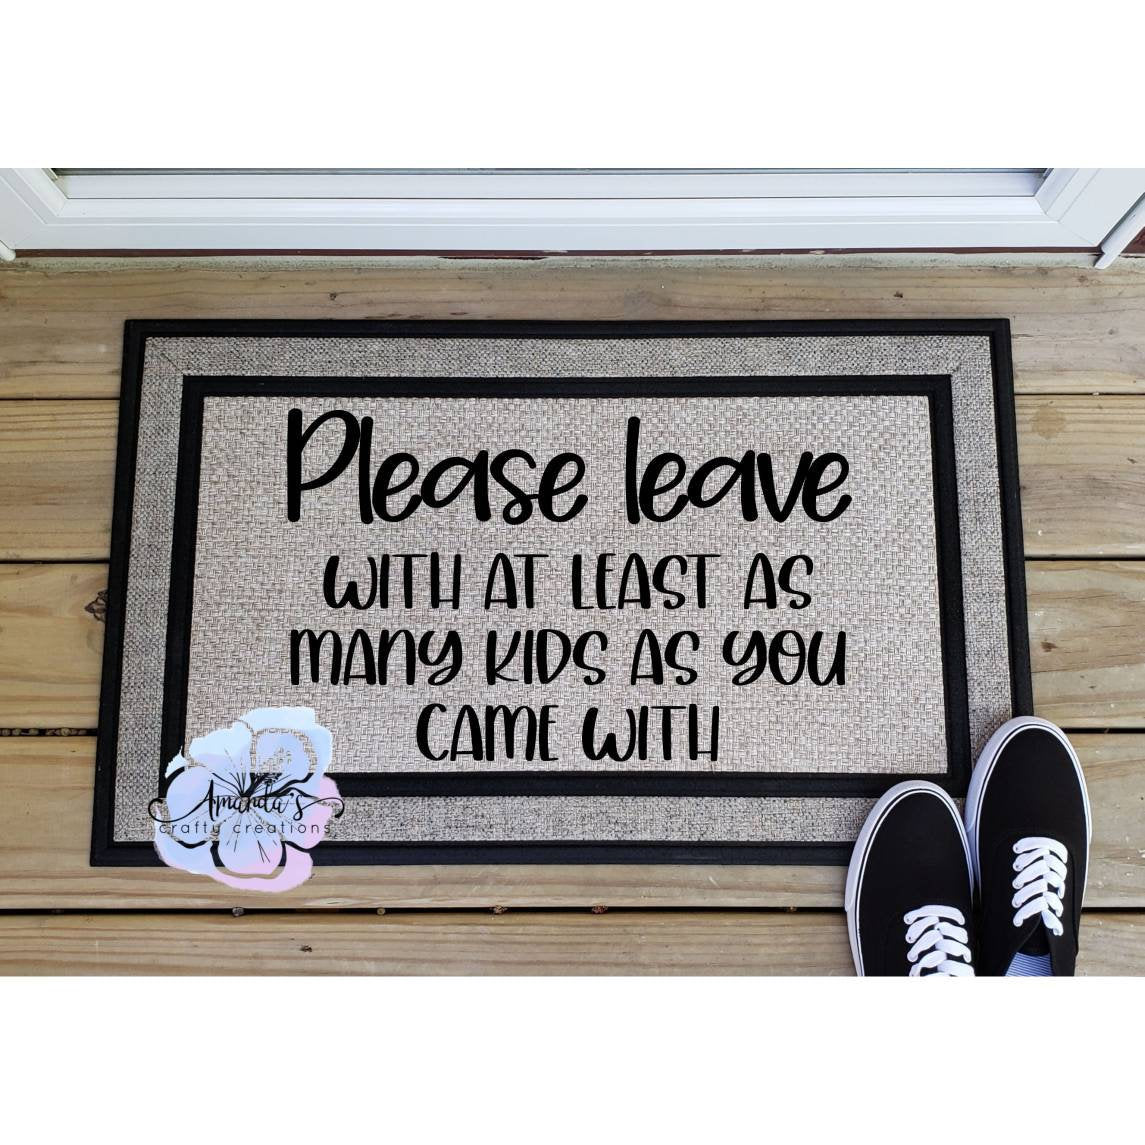 Door mat please leave with at least as many kids as you came with